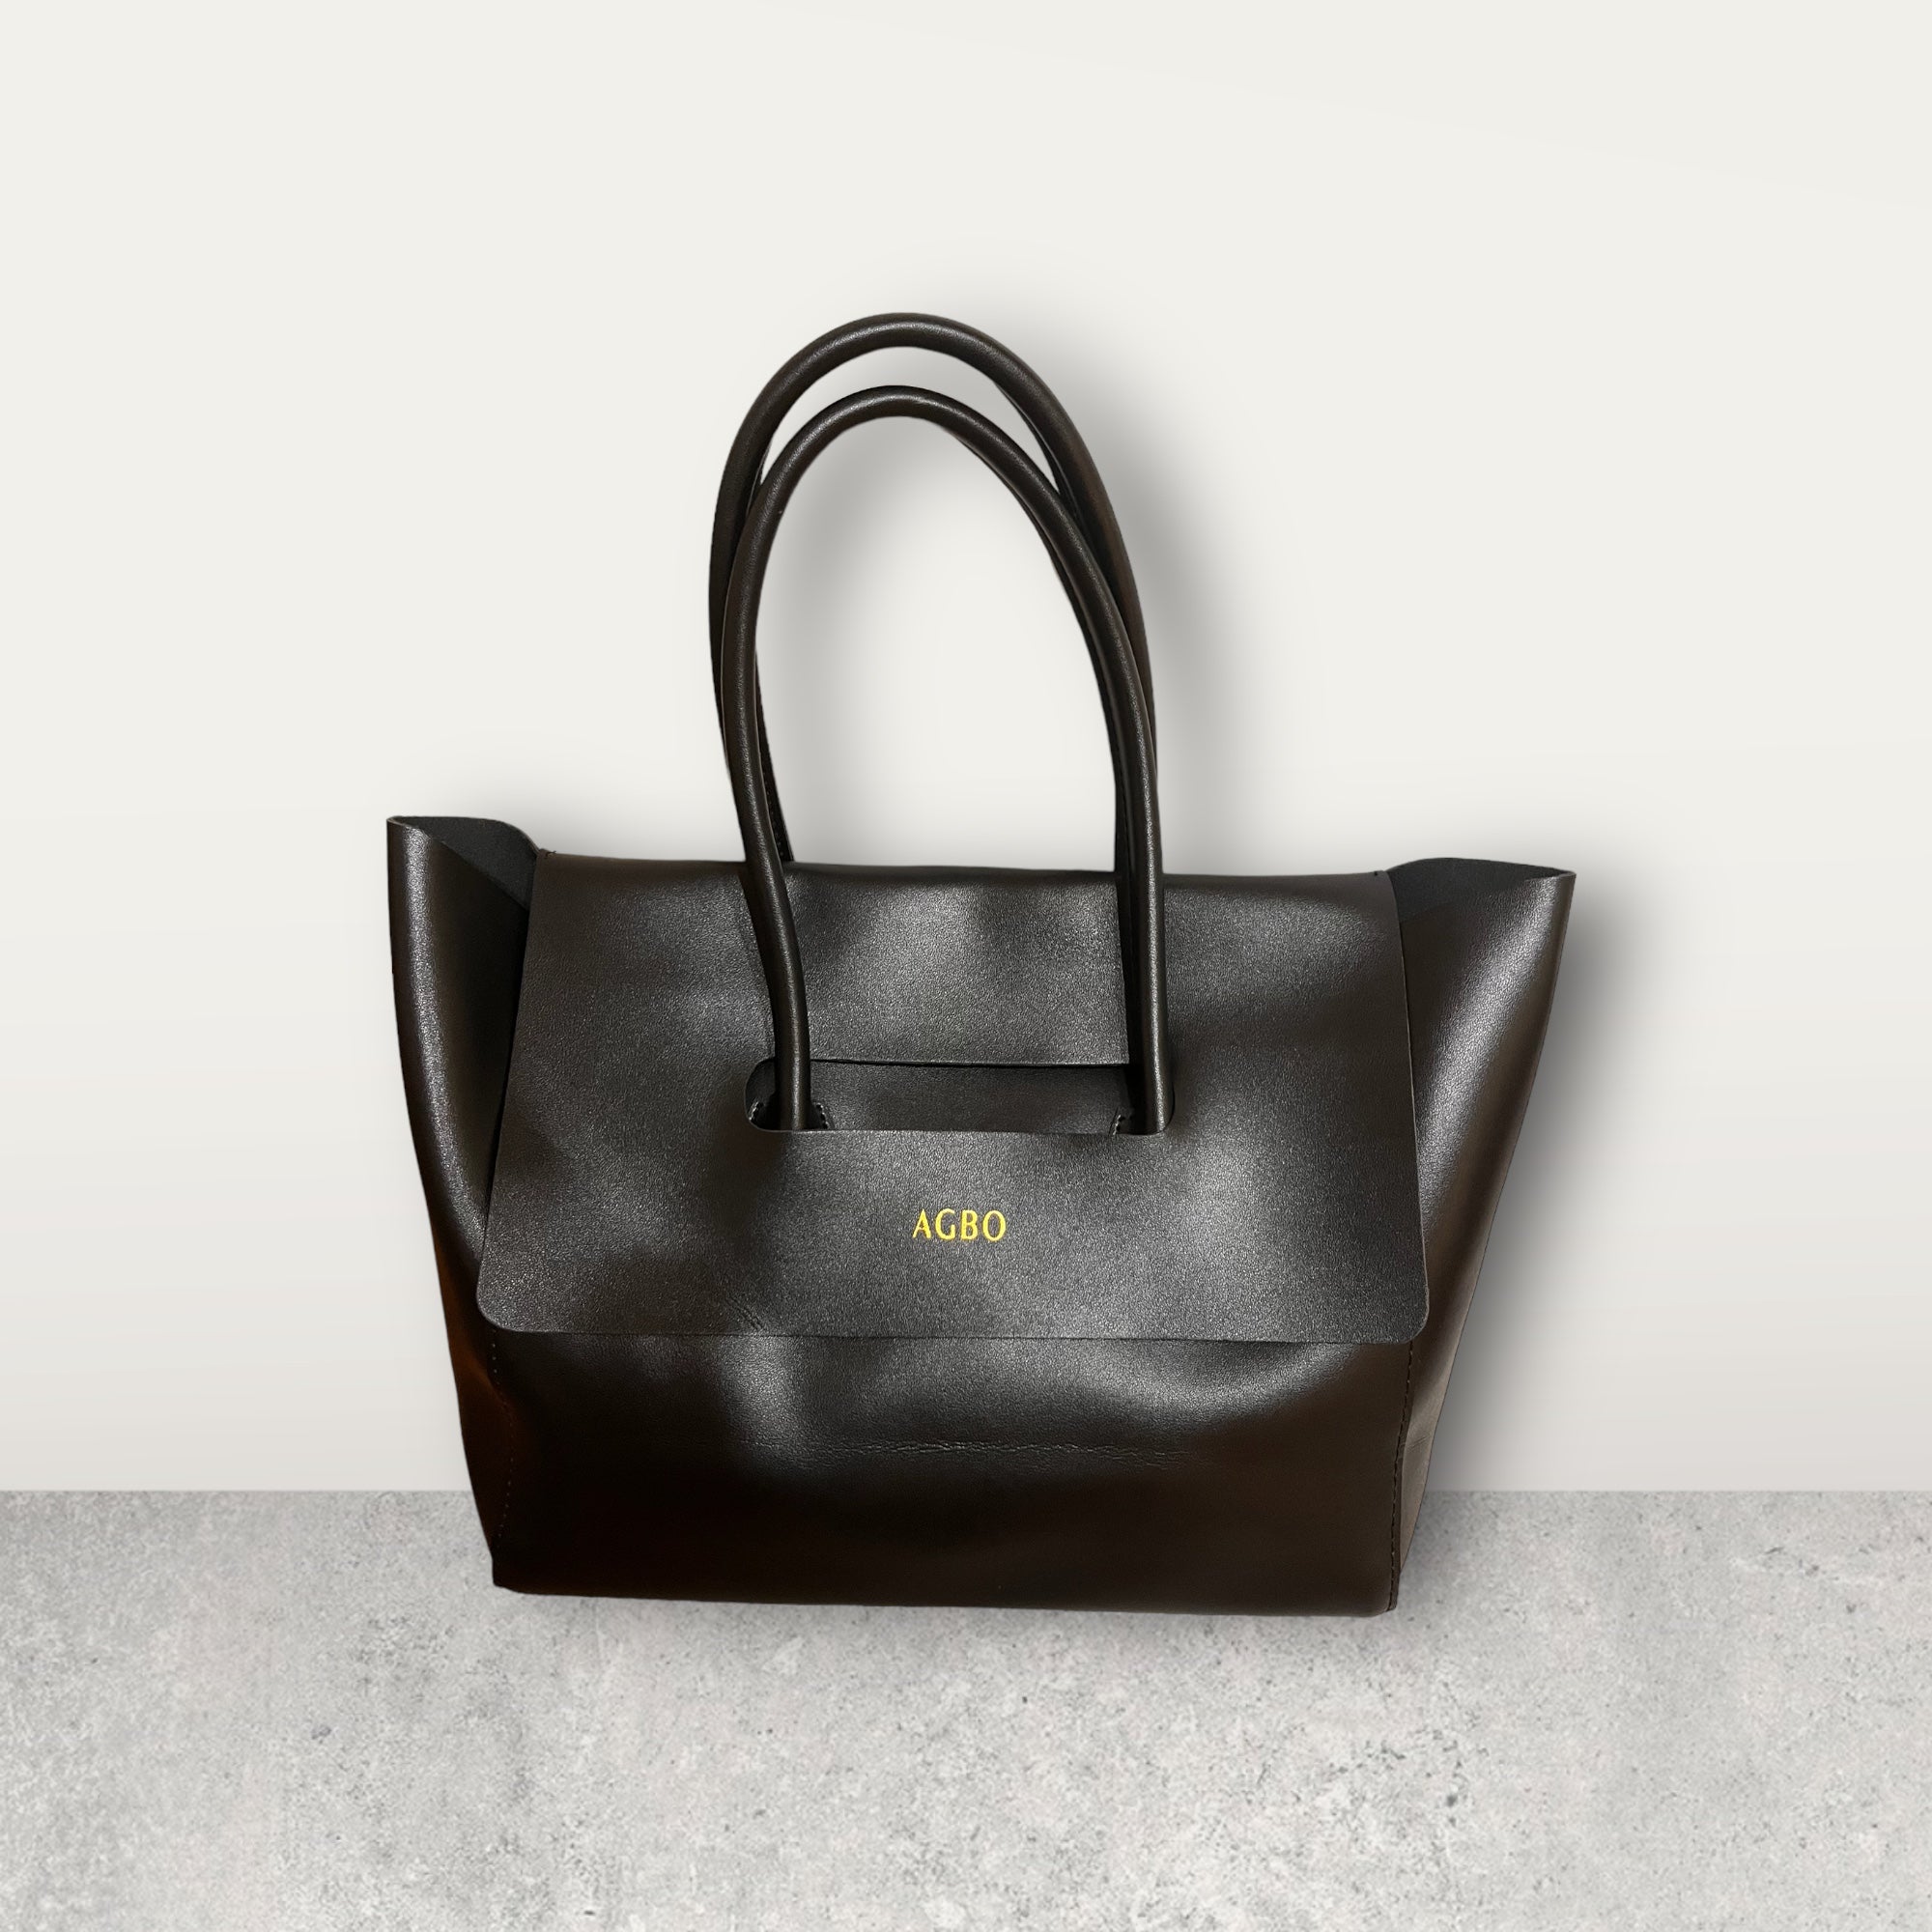 Medium tote bag sourced from quality materials for durability,style and simplicity